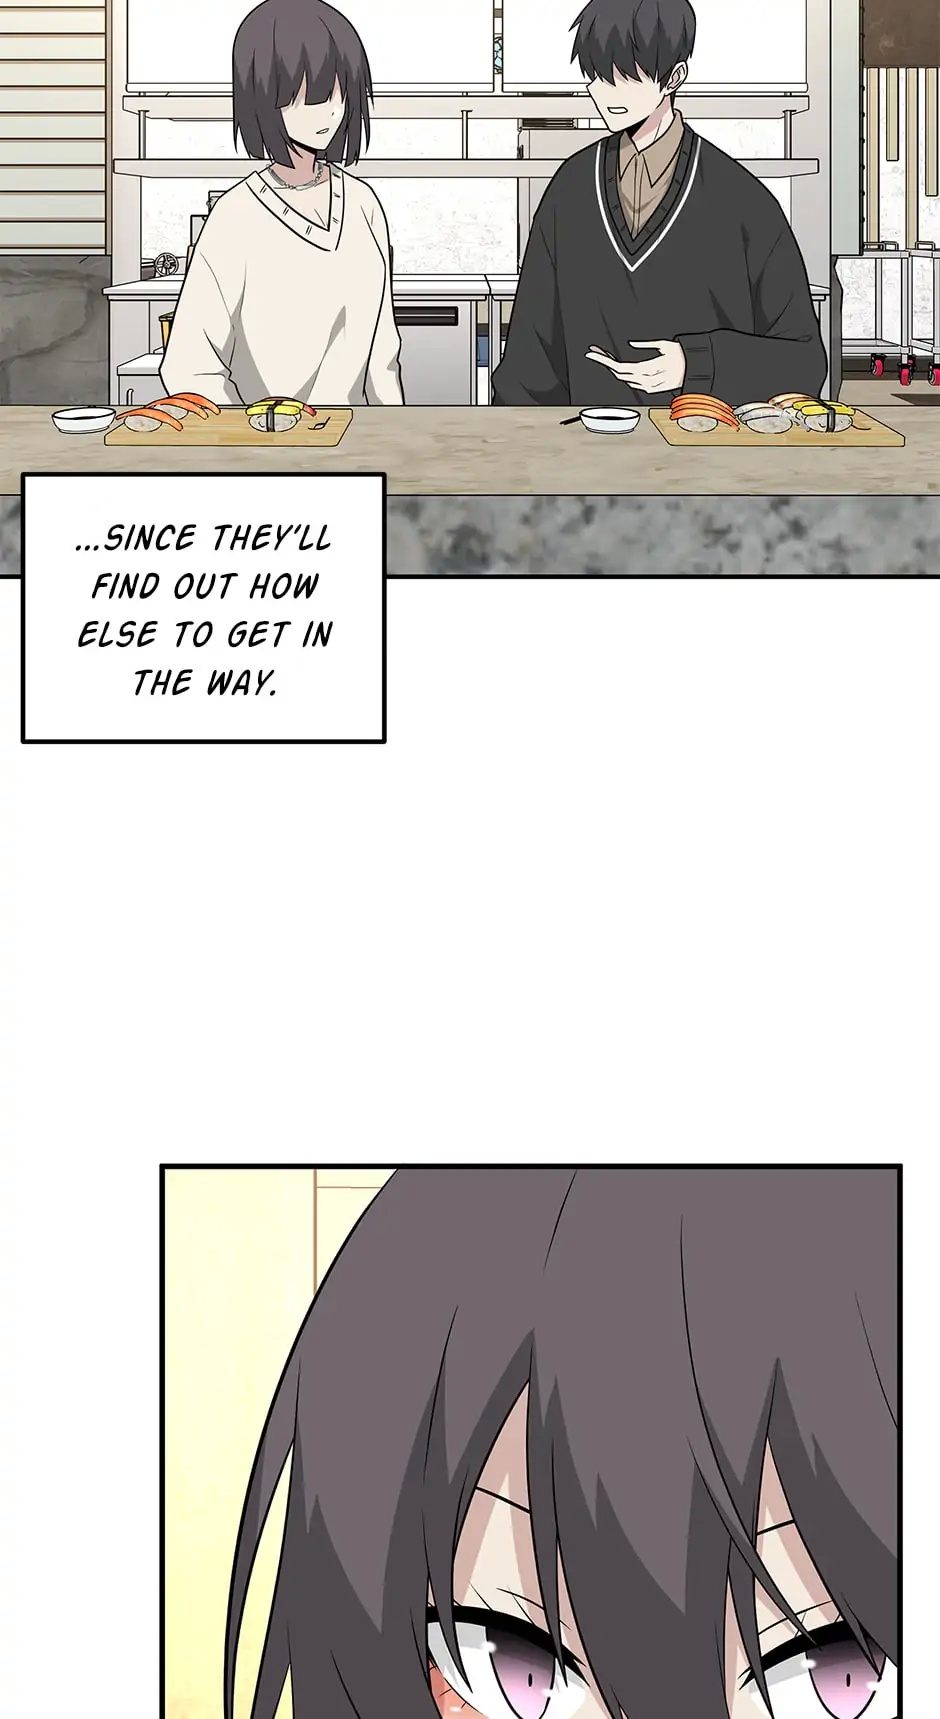 Where Are You Looking, Manager? - Page 2